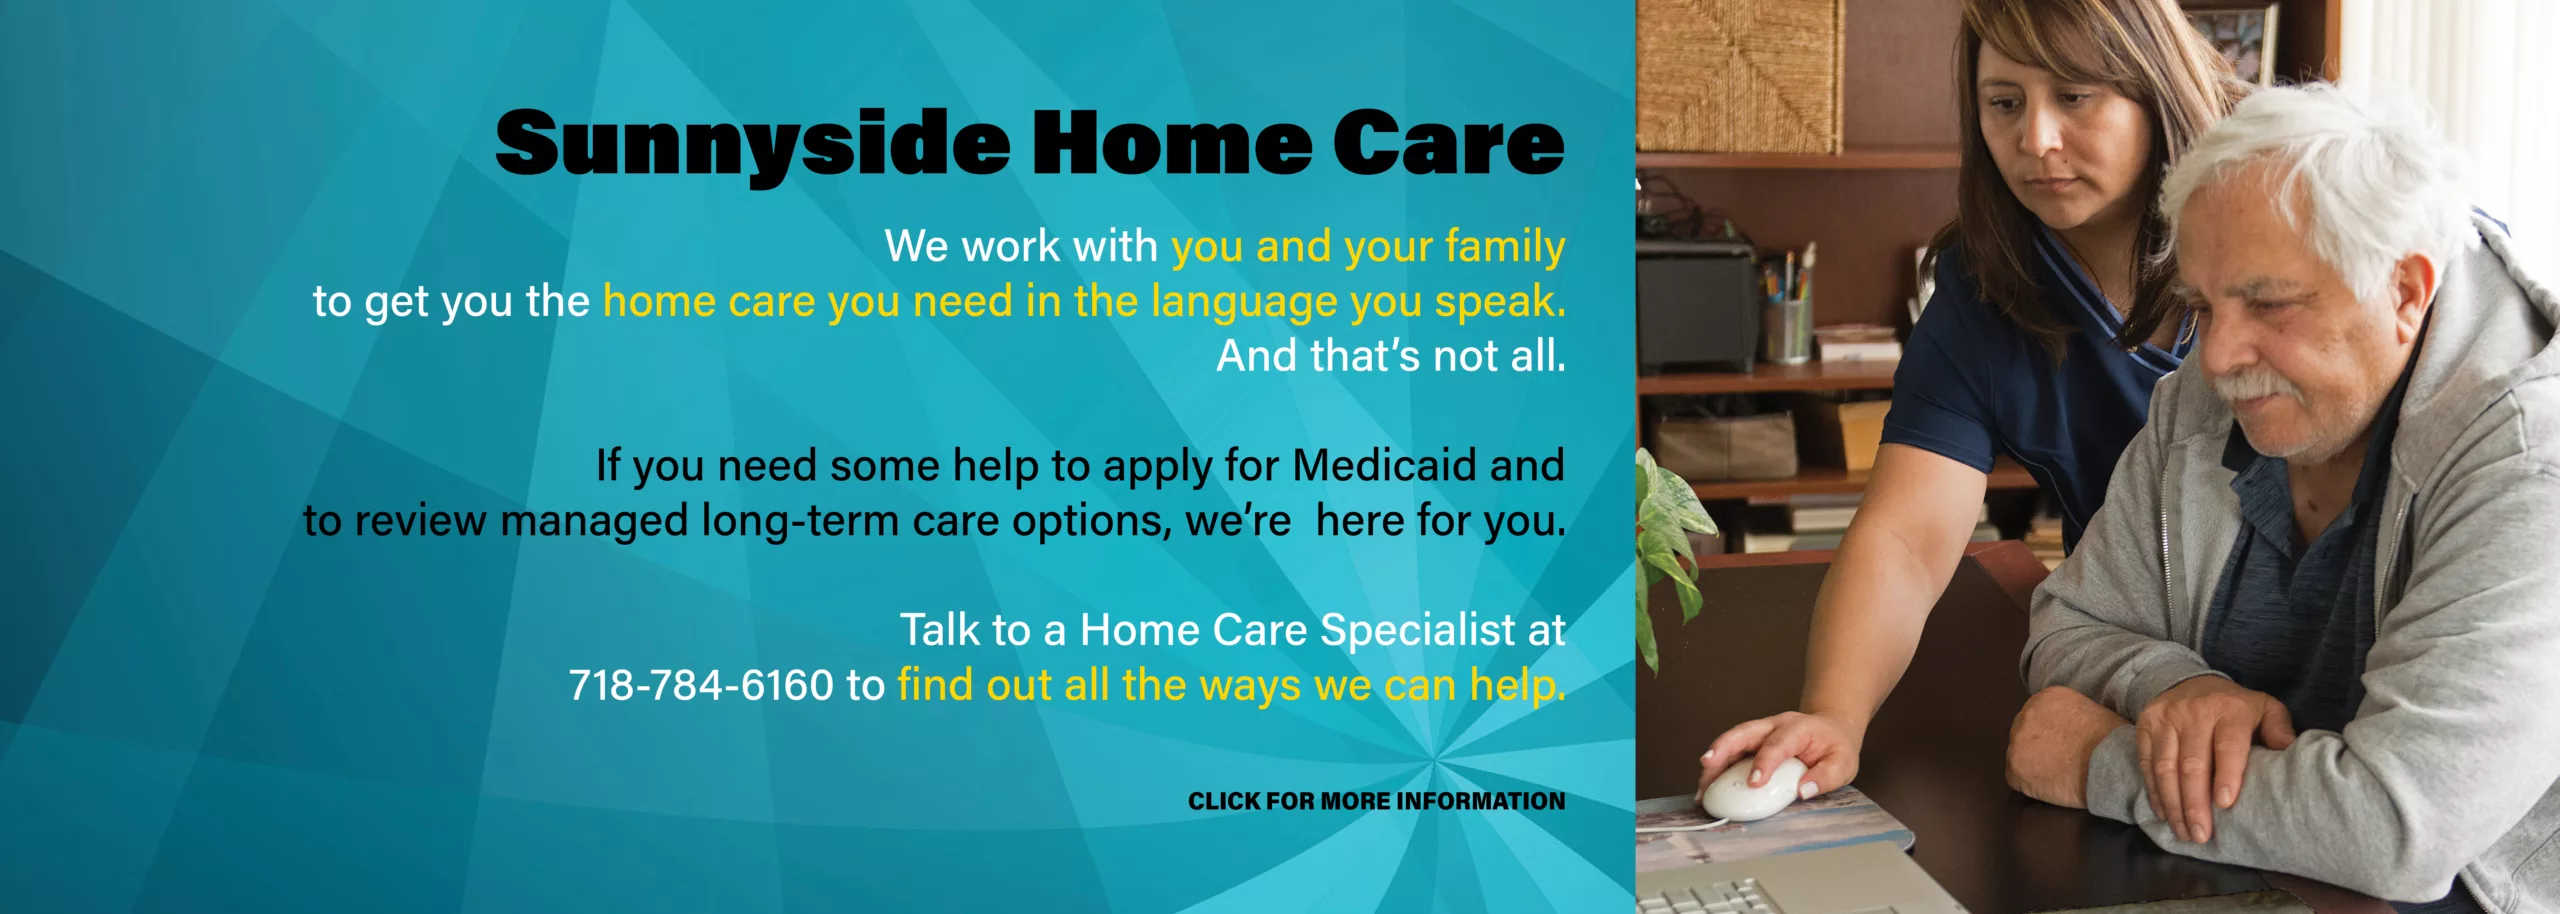 SCS Homecare helps you get the help you need